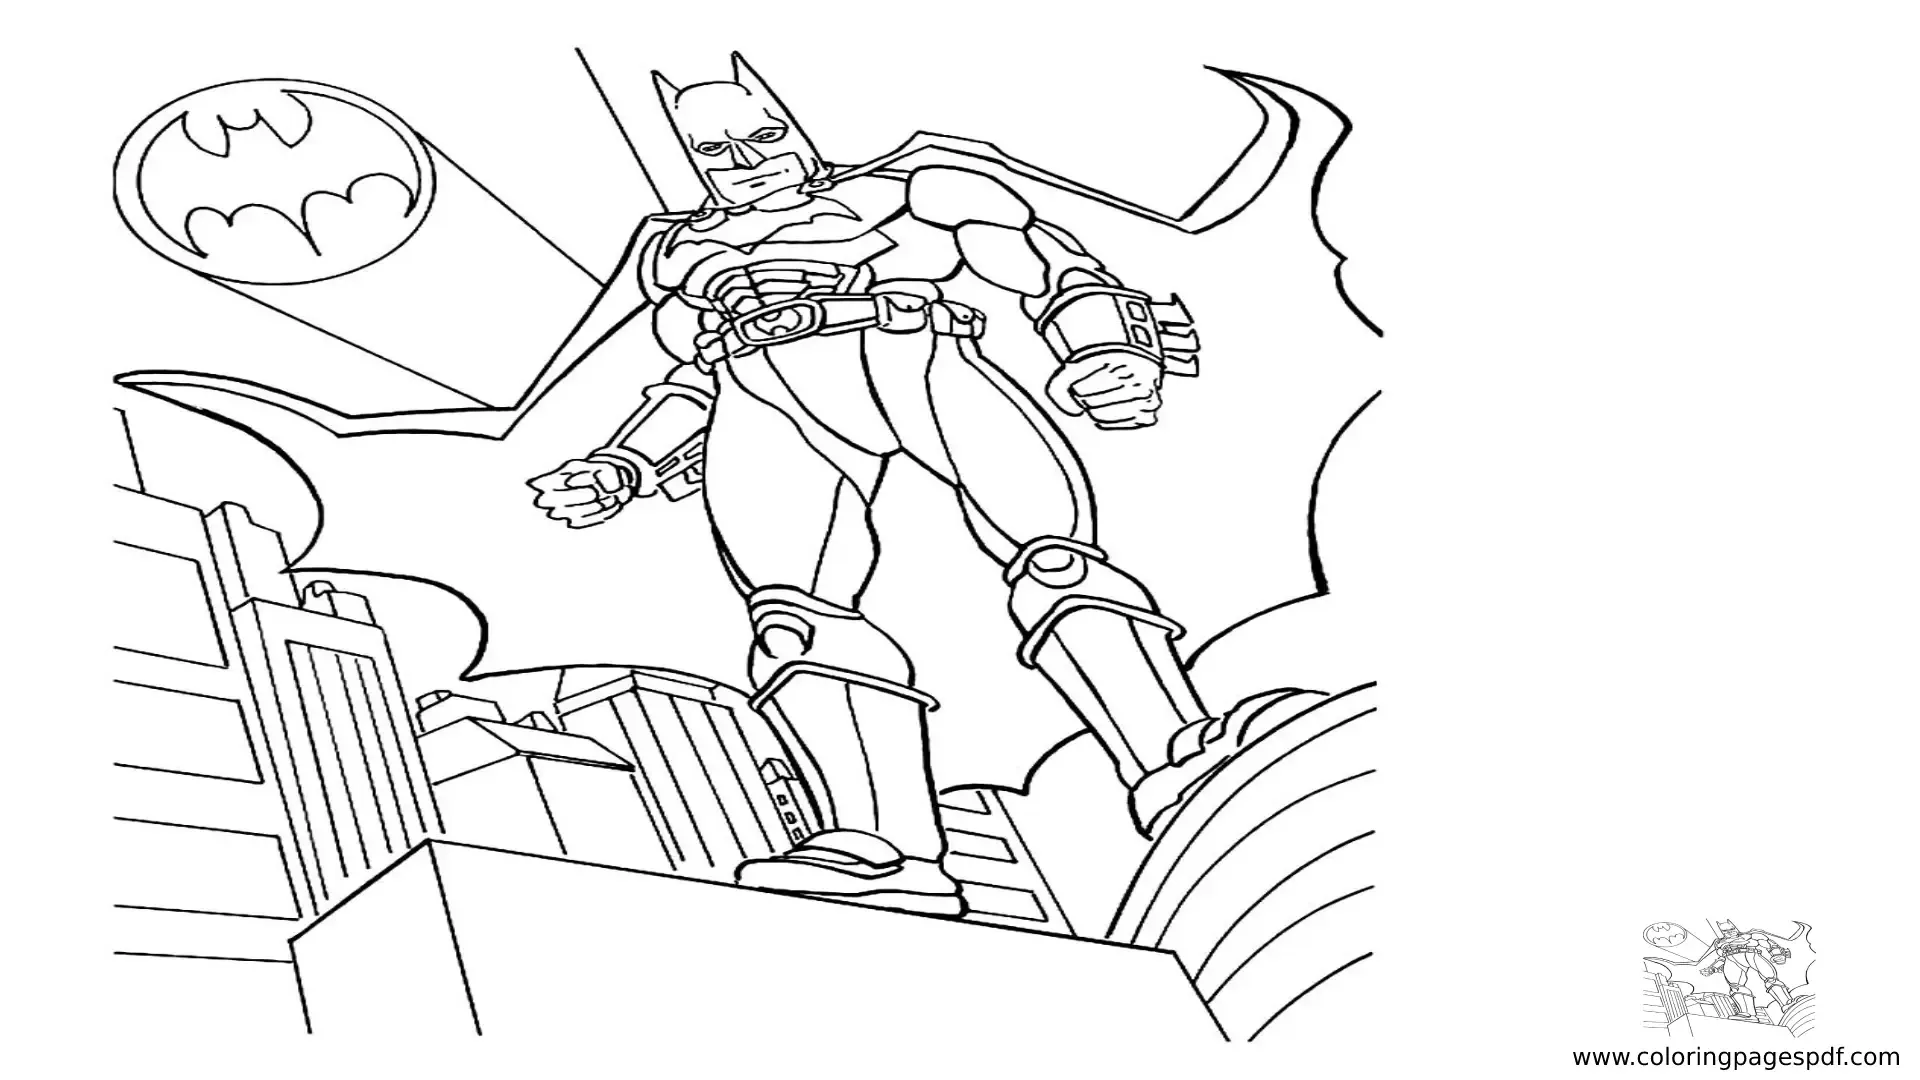 Coloring Pages Of Batman With The Bat-Signal